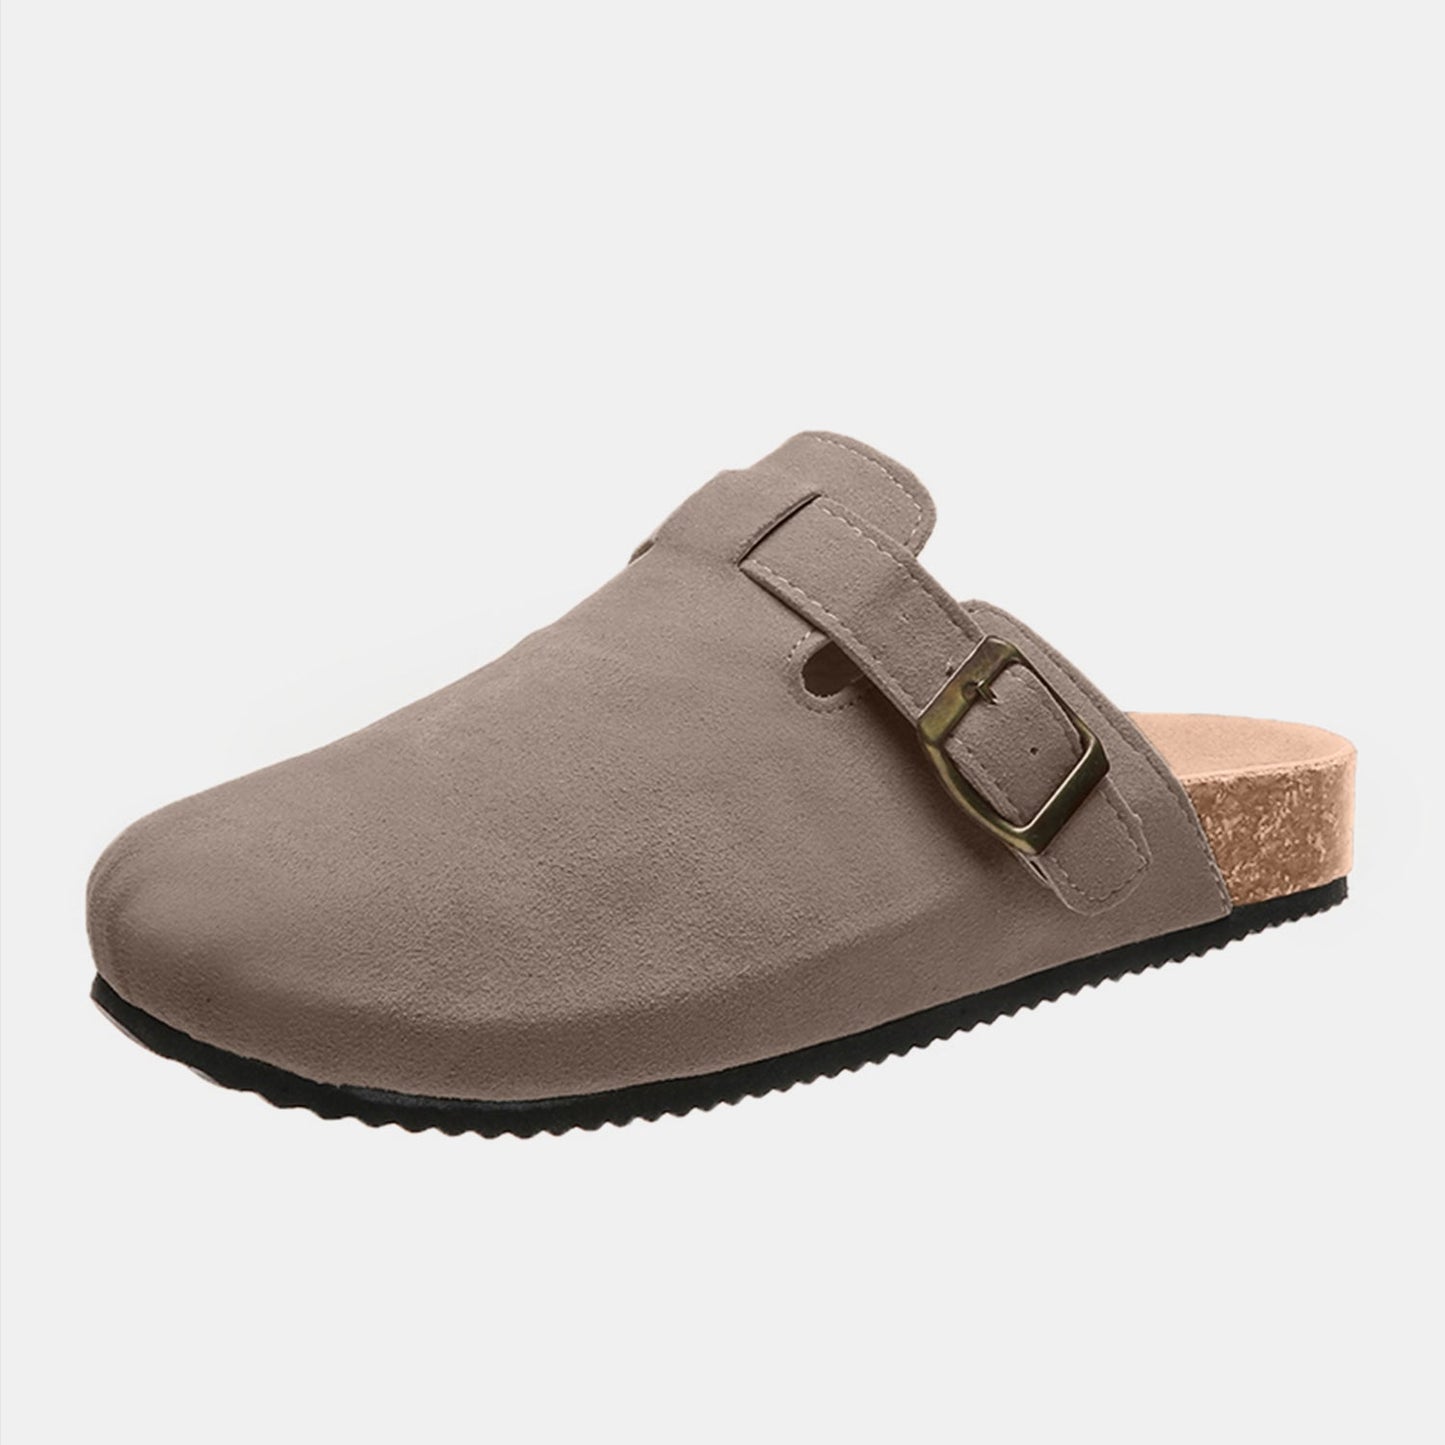 Suede Closed Toe Buckle Slide Charcoal / 8.5